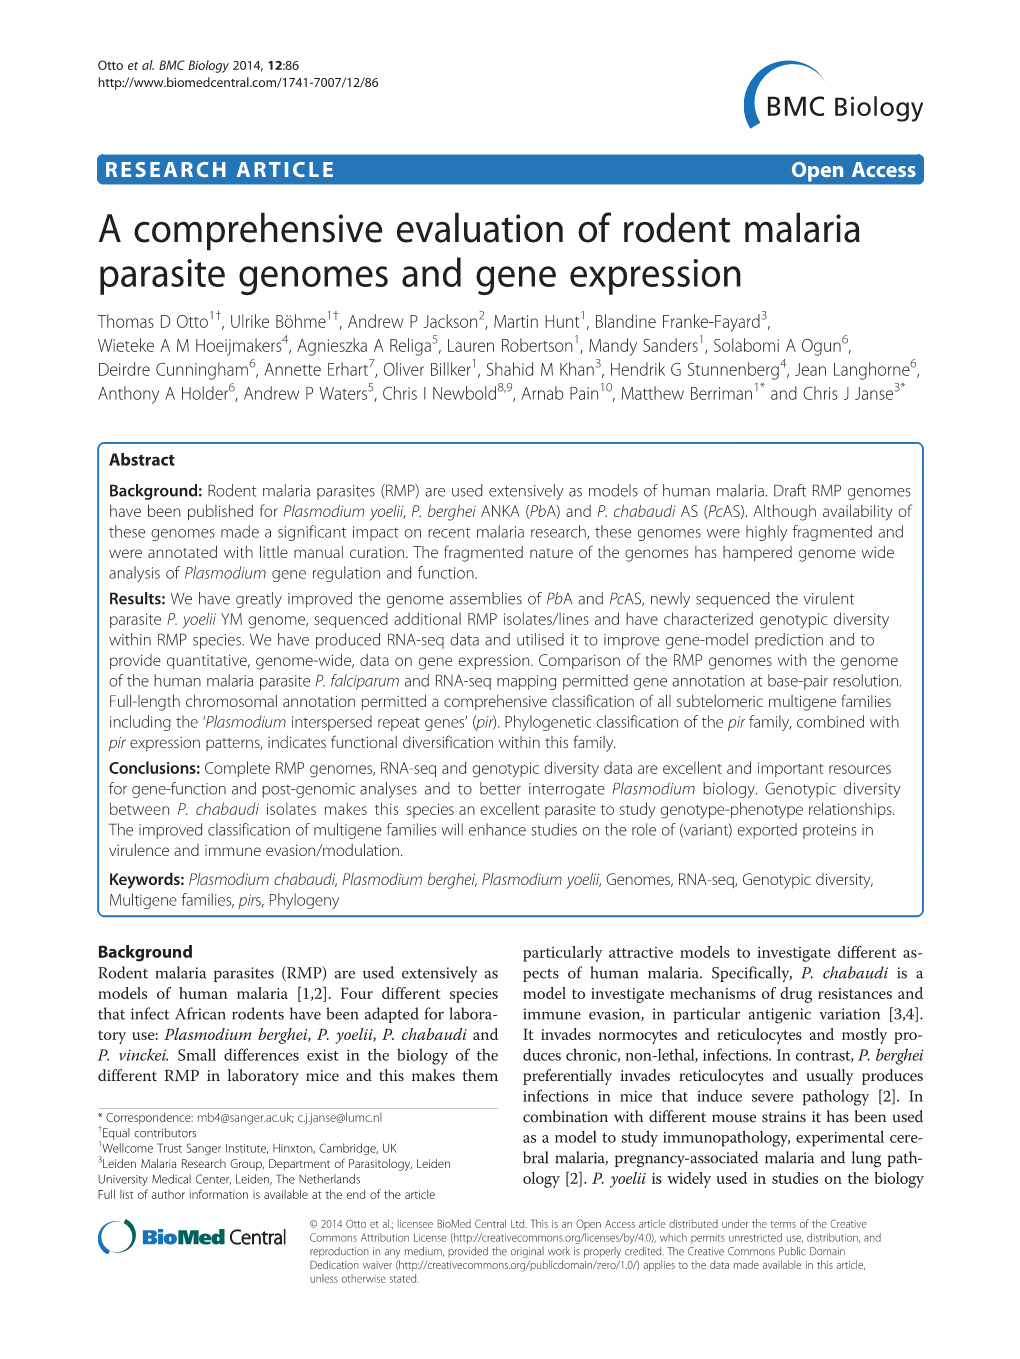 A Comprehensive Evaluation of Rodent Malaria Parasite Genomes And